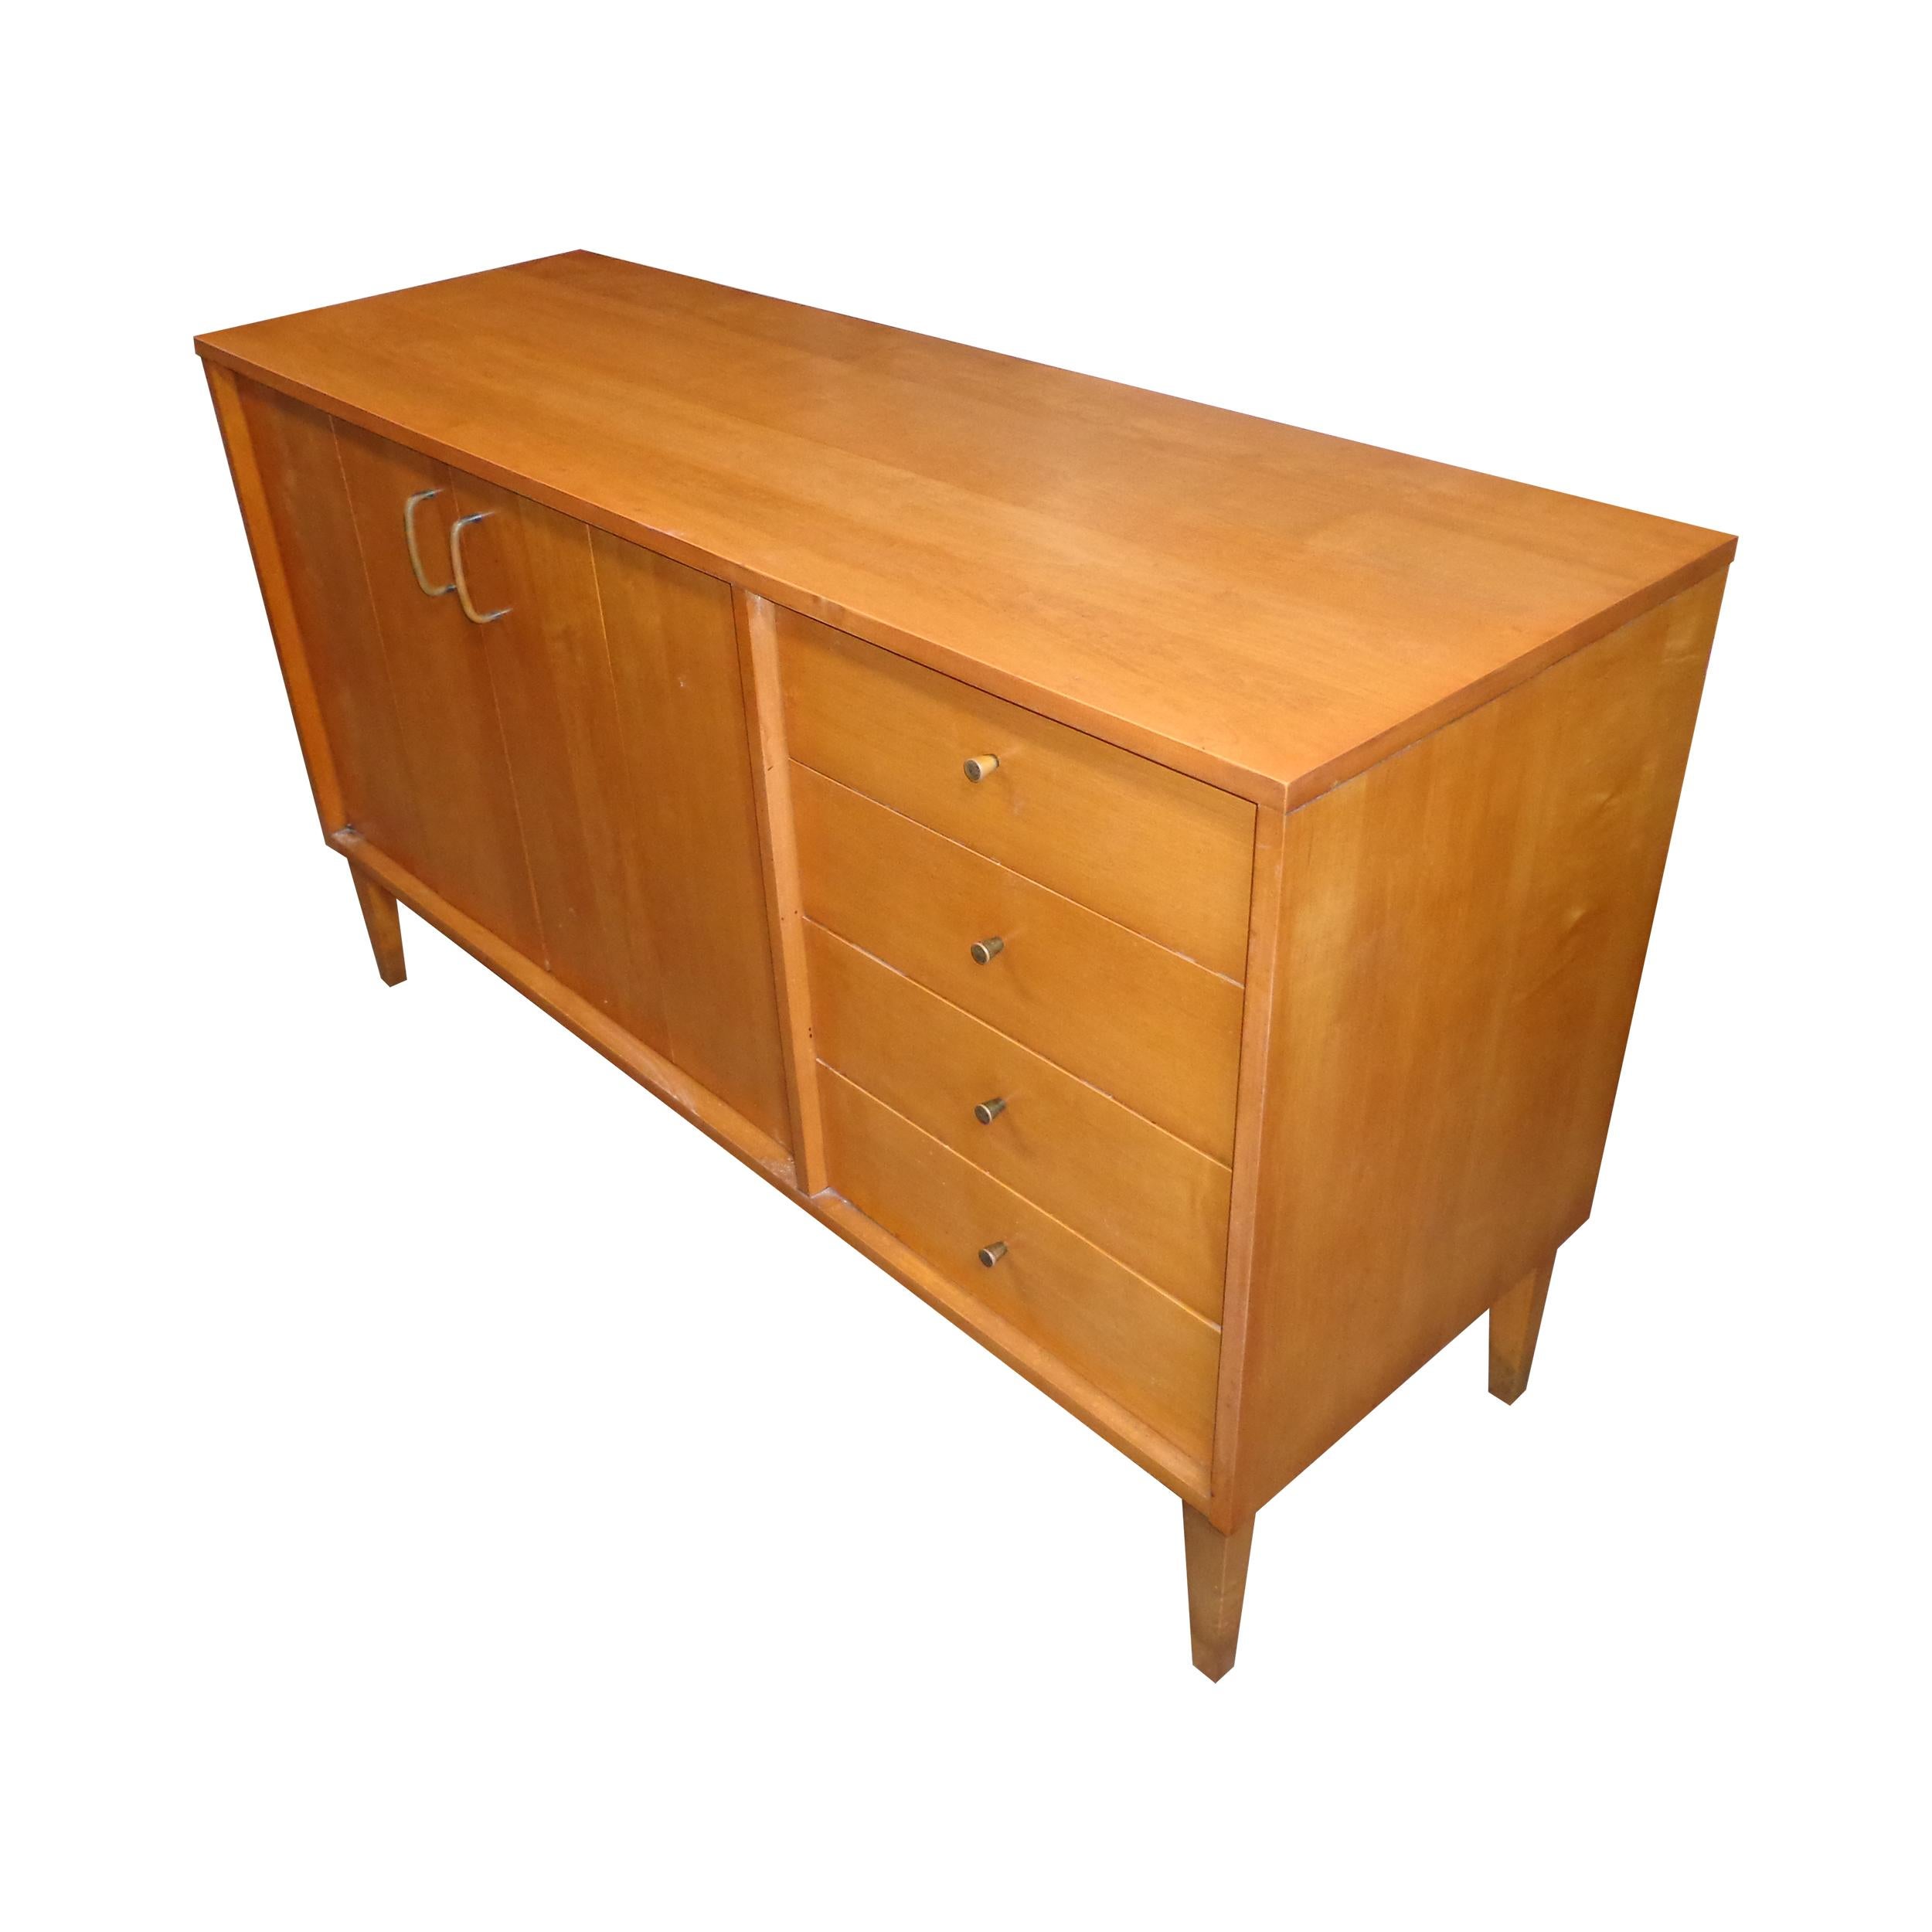 54” Paul McCobb Planner Group credenza

A rare piece in maple from the Planner Group by Paul McCobb for Winchedon. A very versatile piece featuring 4 drawers and concealed shelving. Nickel pulls and tapered legs.
Previous label removed. See photo